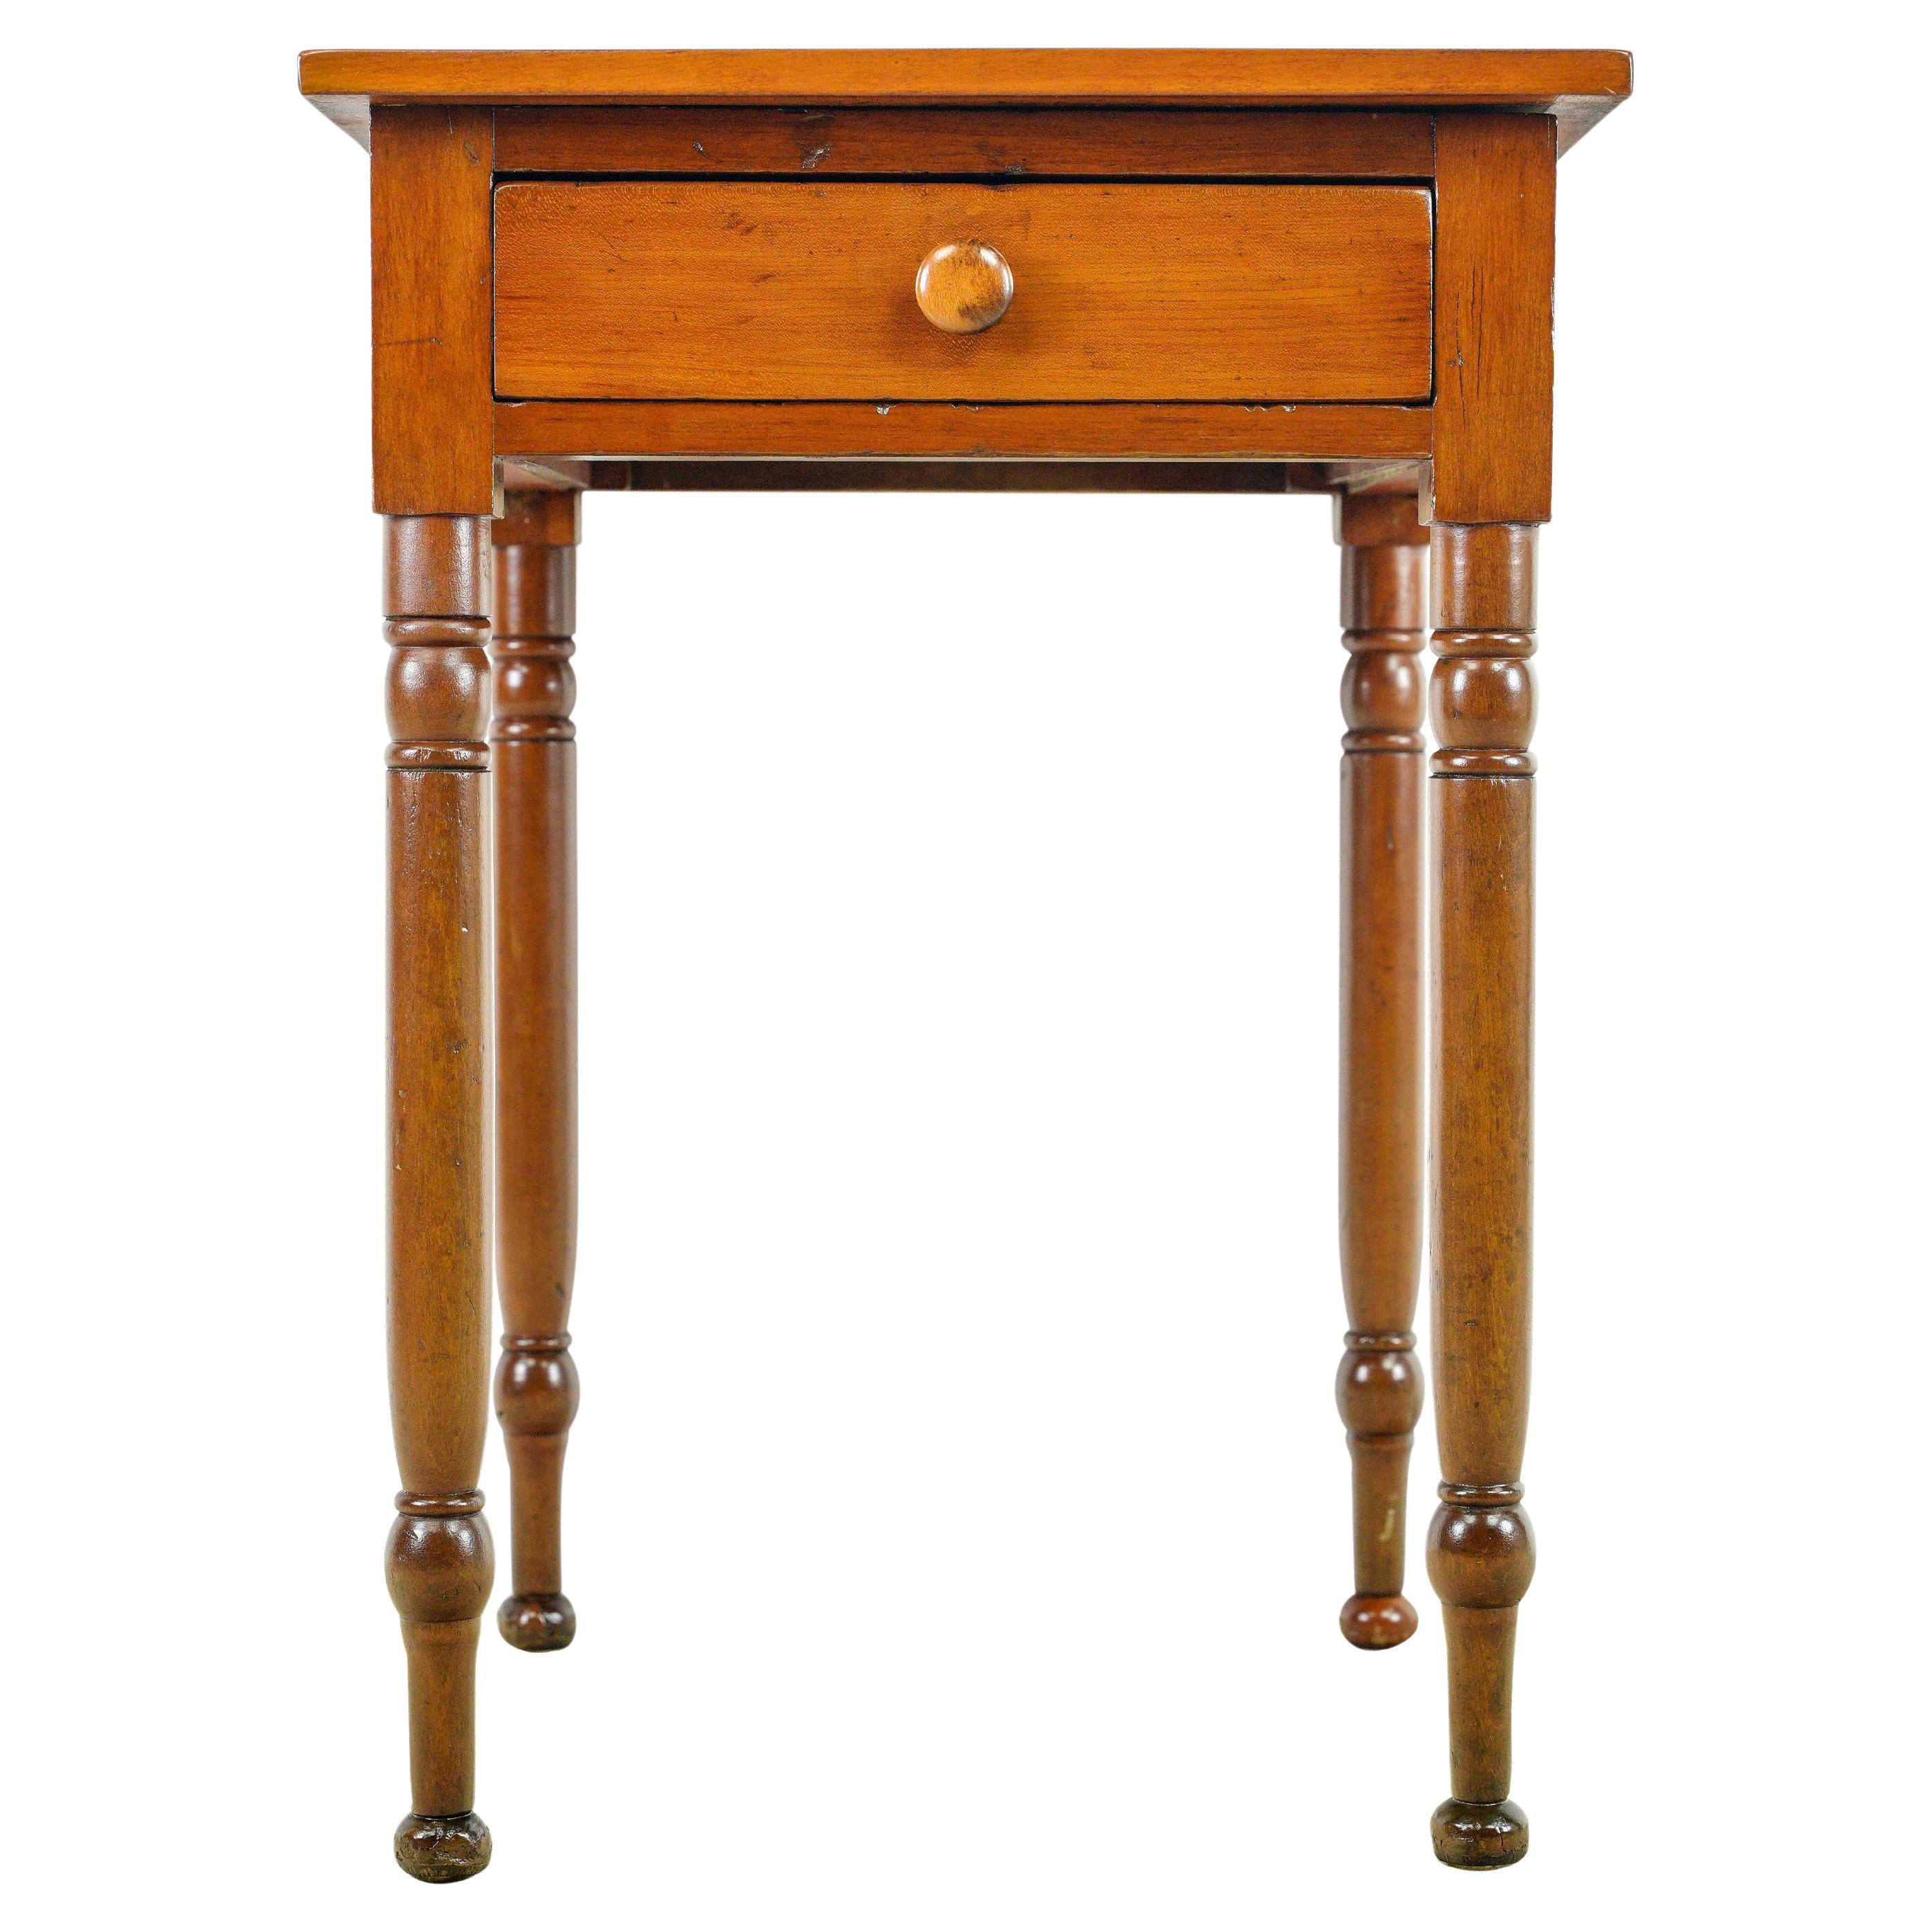 Antique Refinished Cherry Drawer Square End Table Stand For Sale